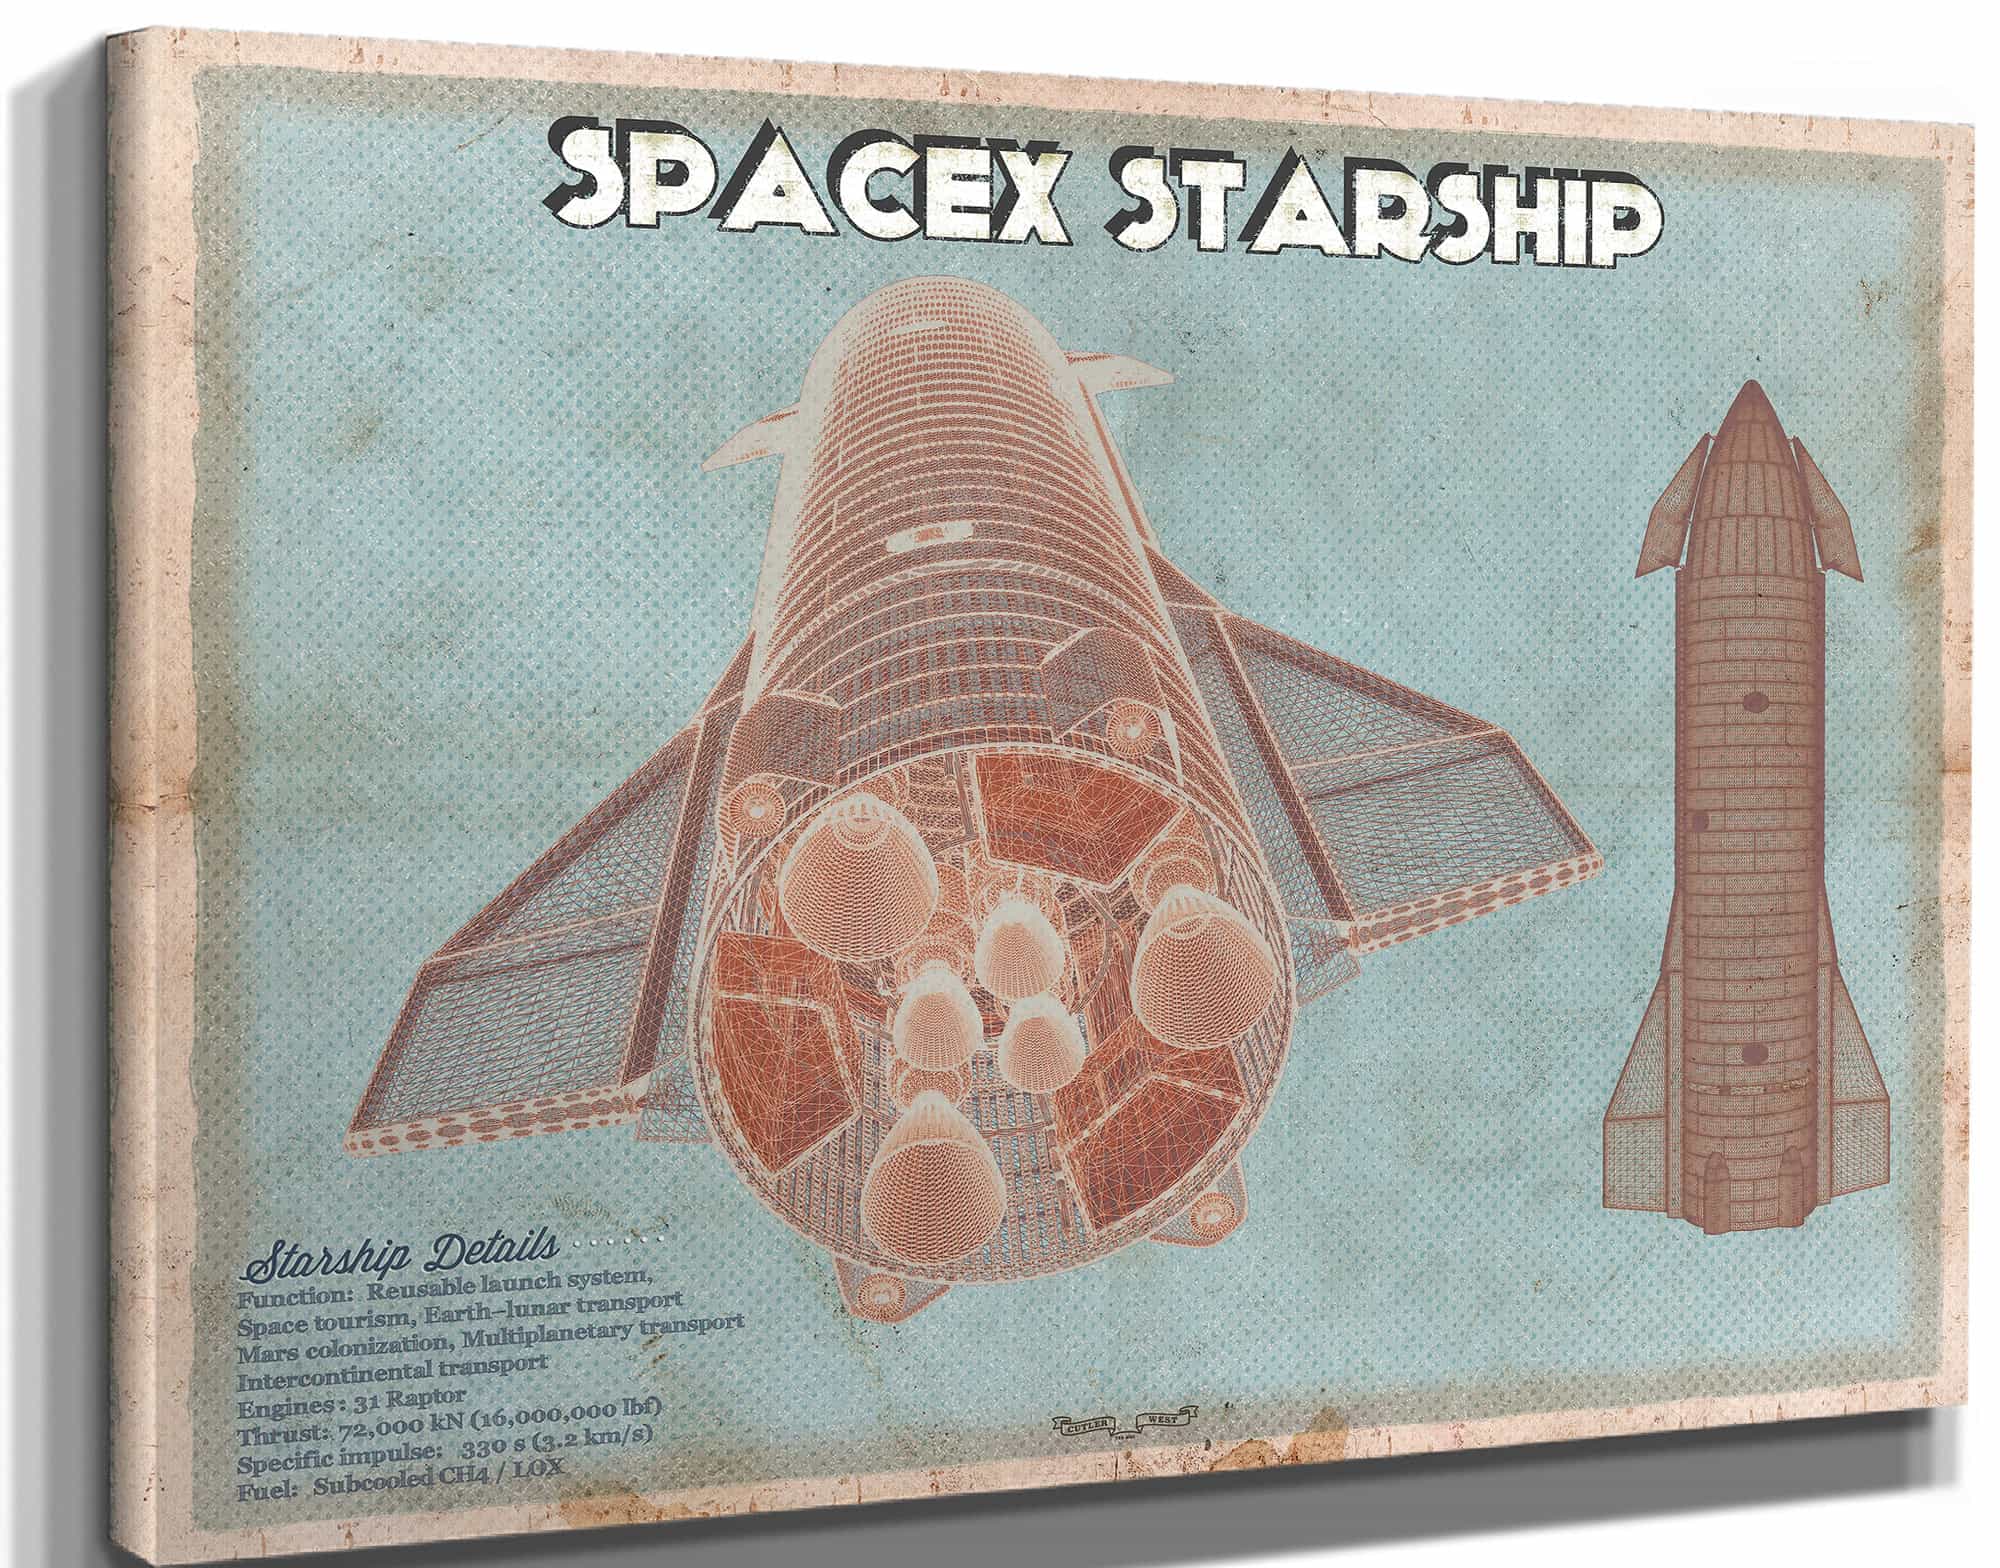 SpaceX Starship Vintage Space Exploration Print